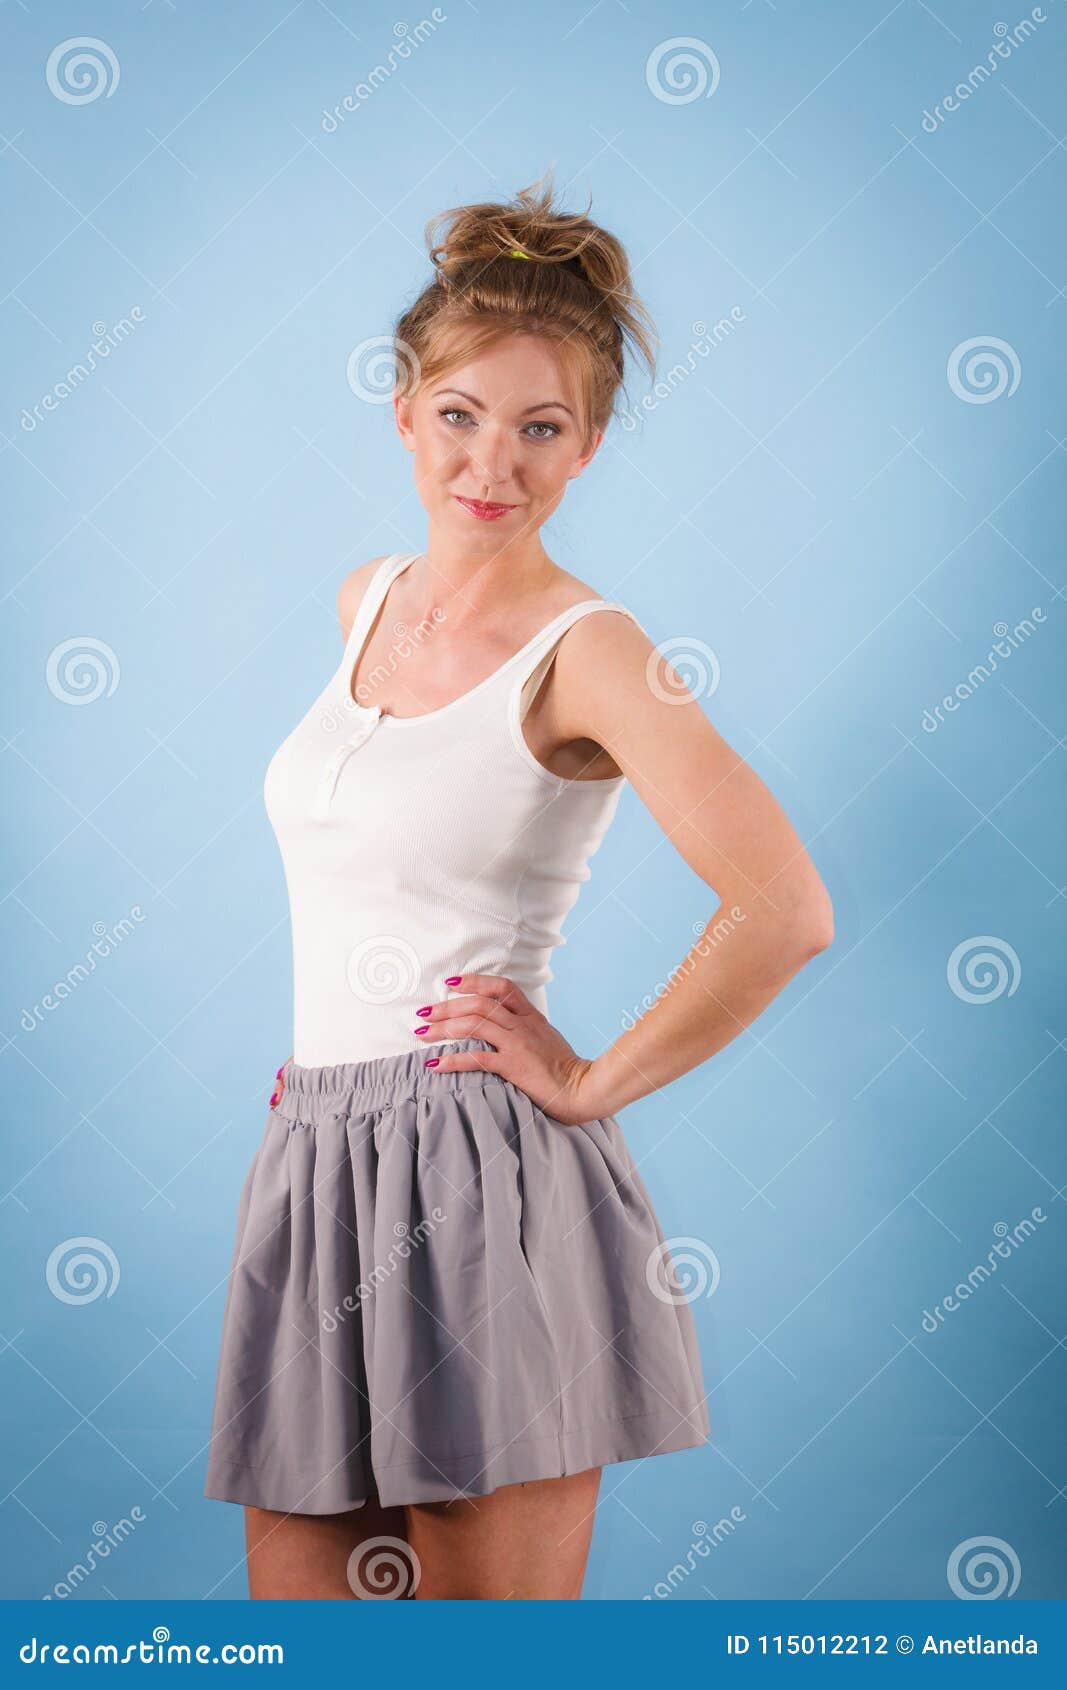 Woman Wearing Top and Skirt Stock Photo - Image of white, casual: 115012212